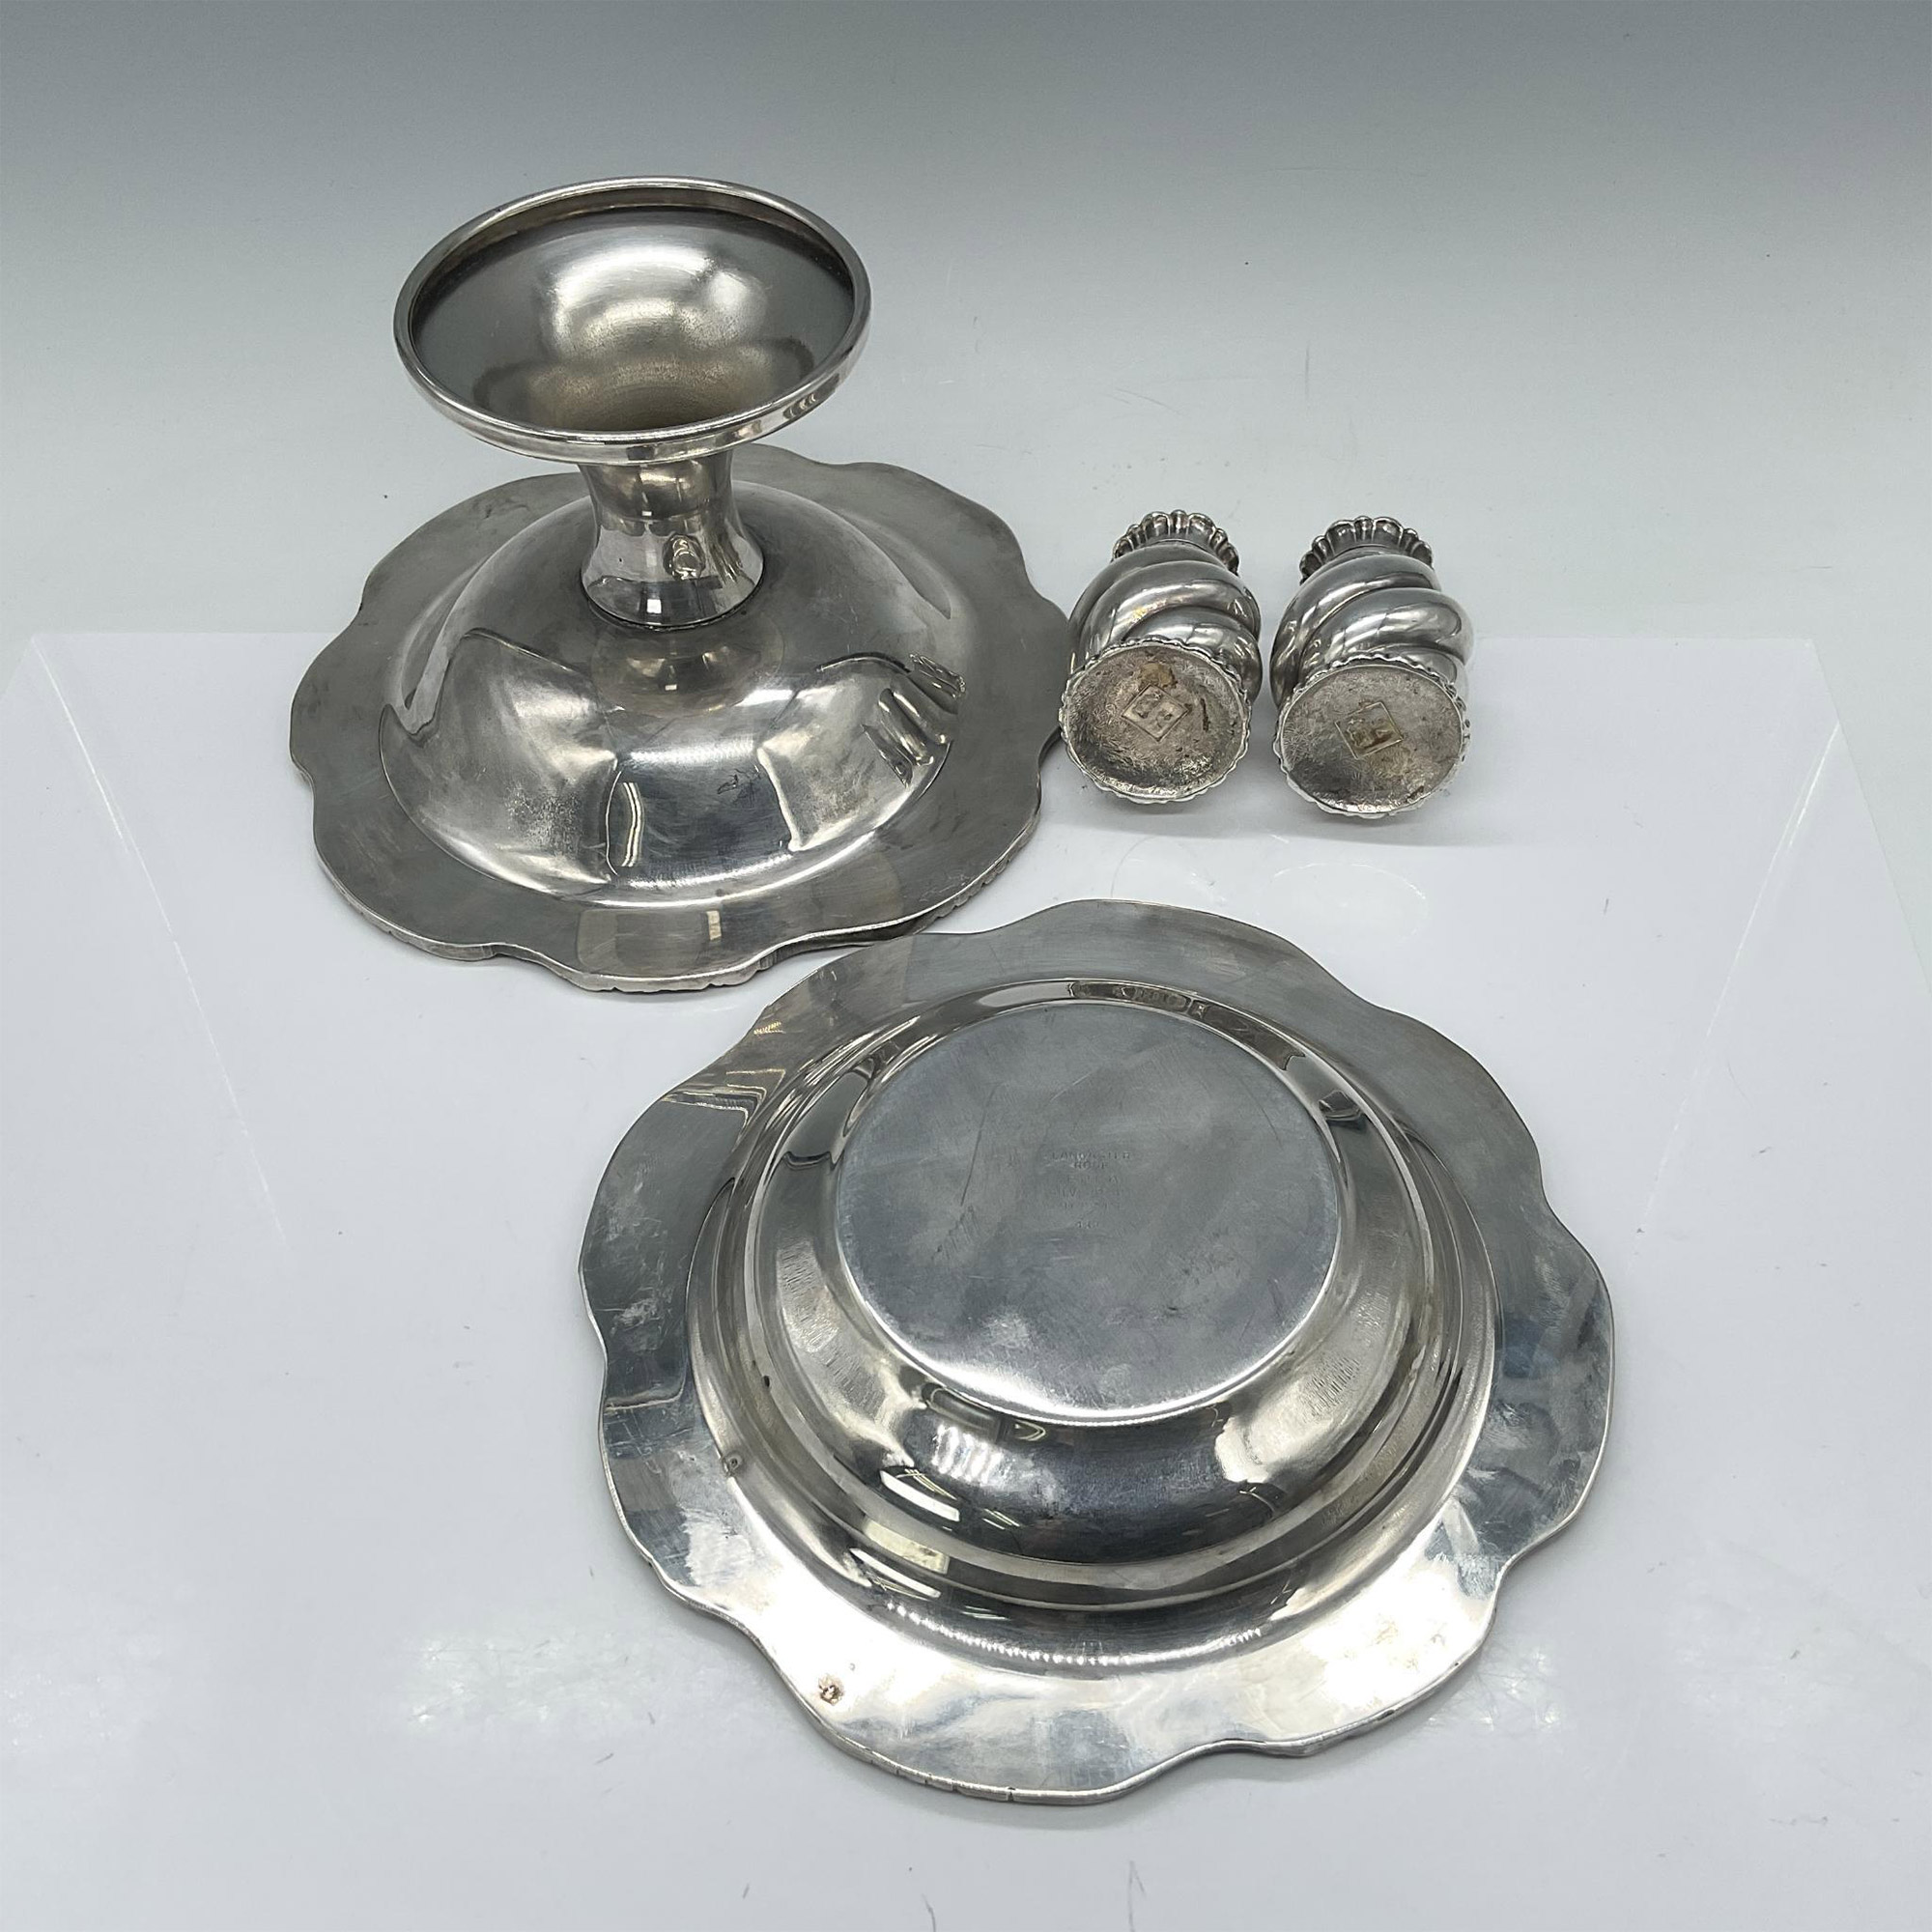 4pc Silverplate Tableware Serving Grouping - Image 3 of 4